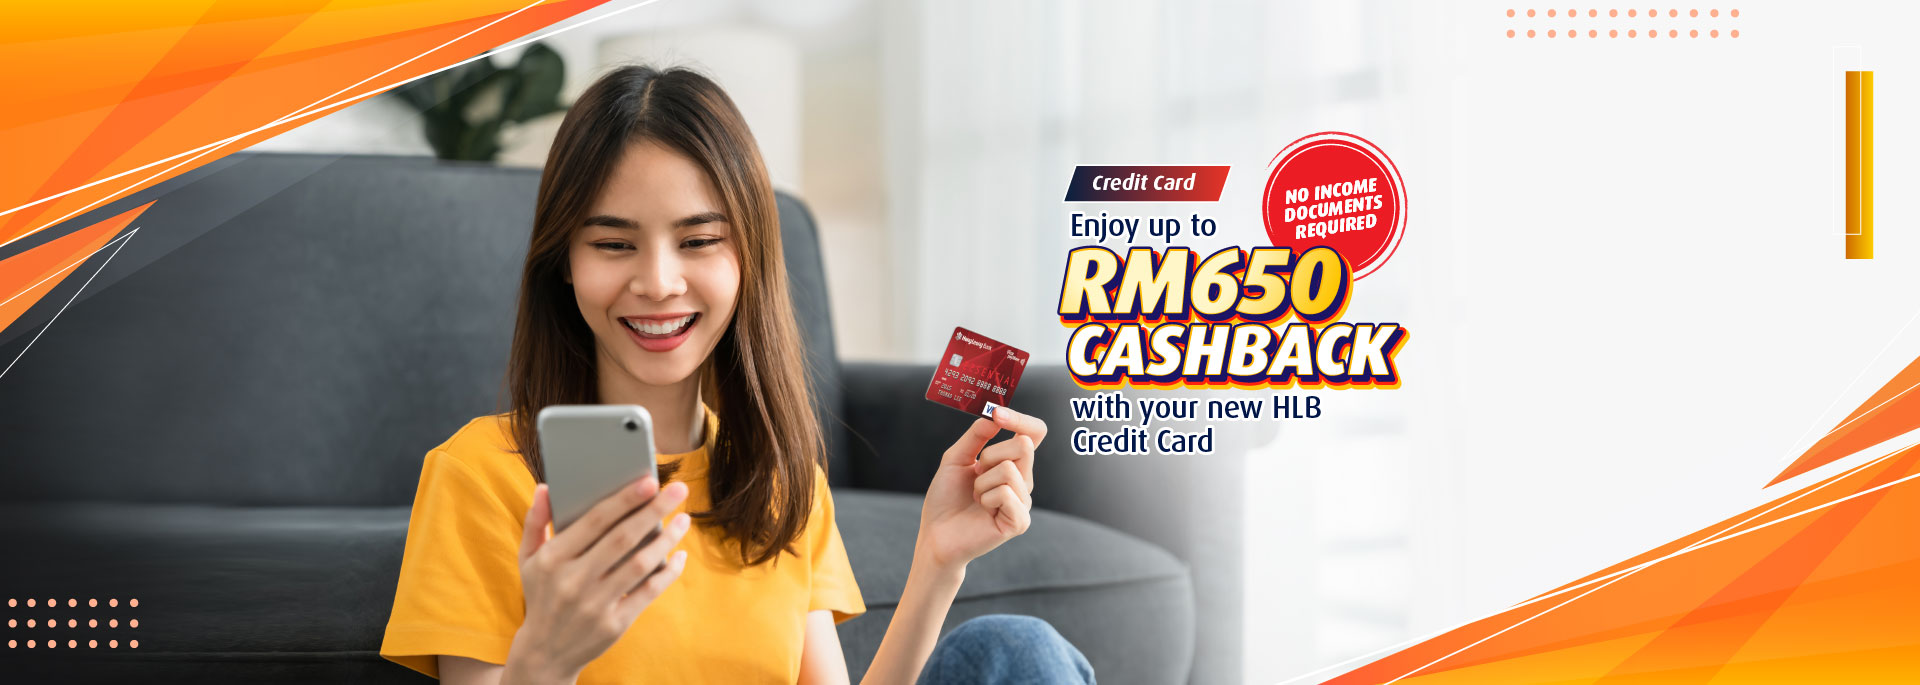 No income documents requiredCredit! Getting up to RM650 Cashback with your new HLB Card